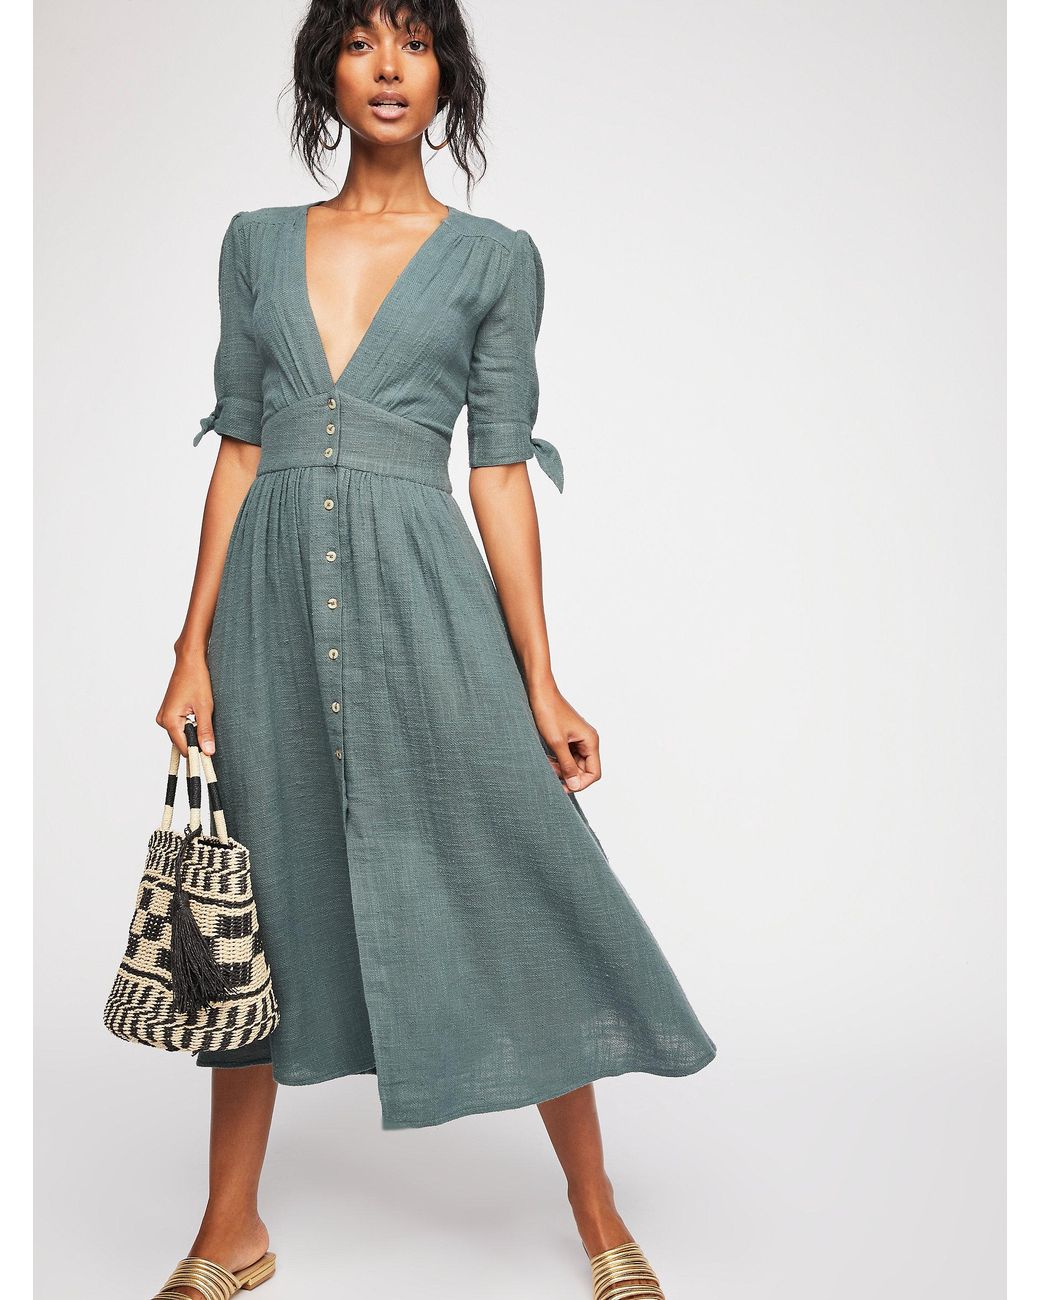 Free People Love Of My Life Midi Dress in Blue | Lyst